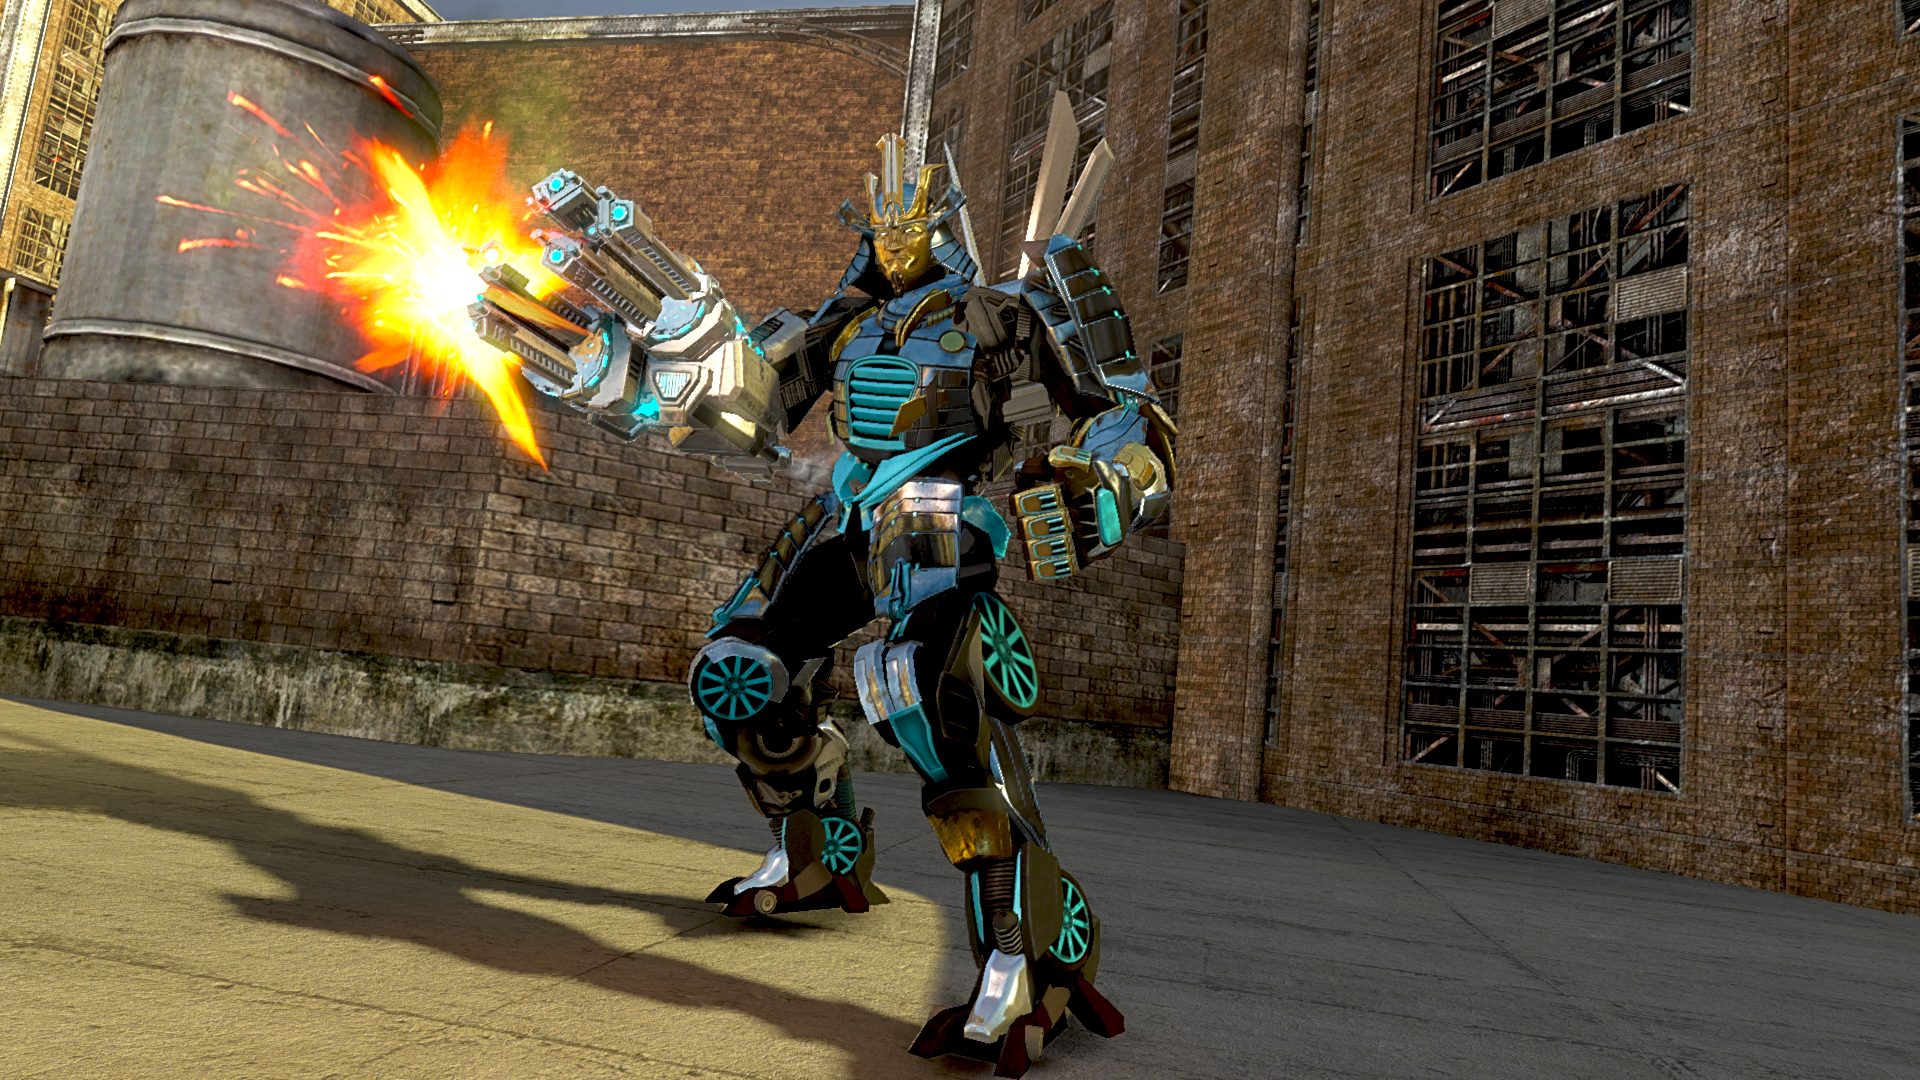 transformers rise of the dark spark metacritic